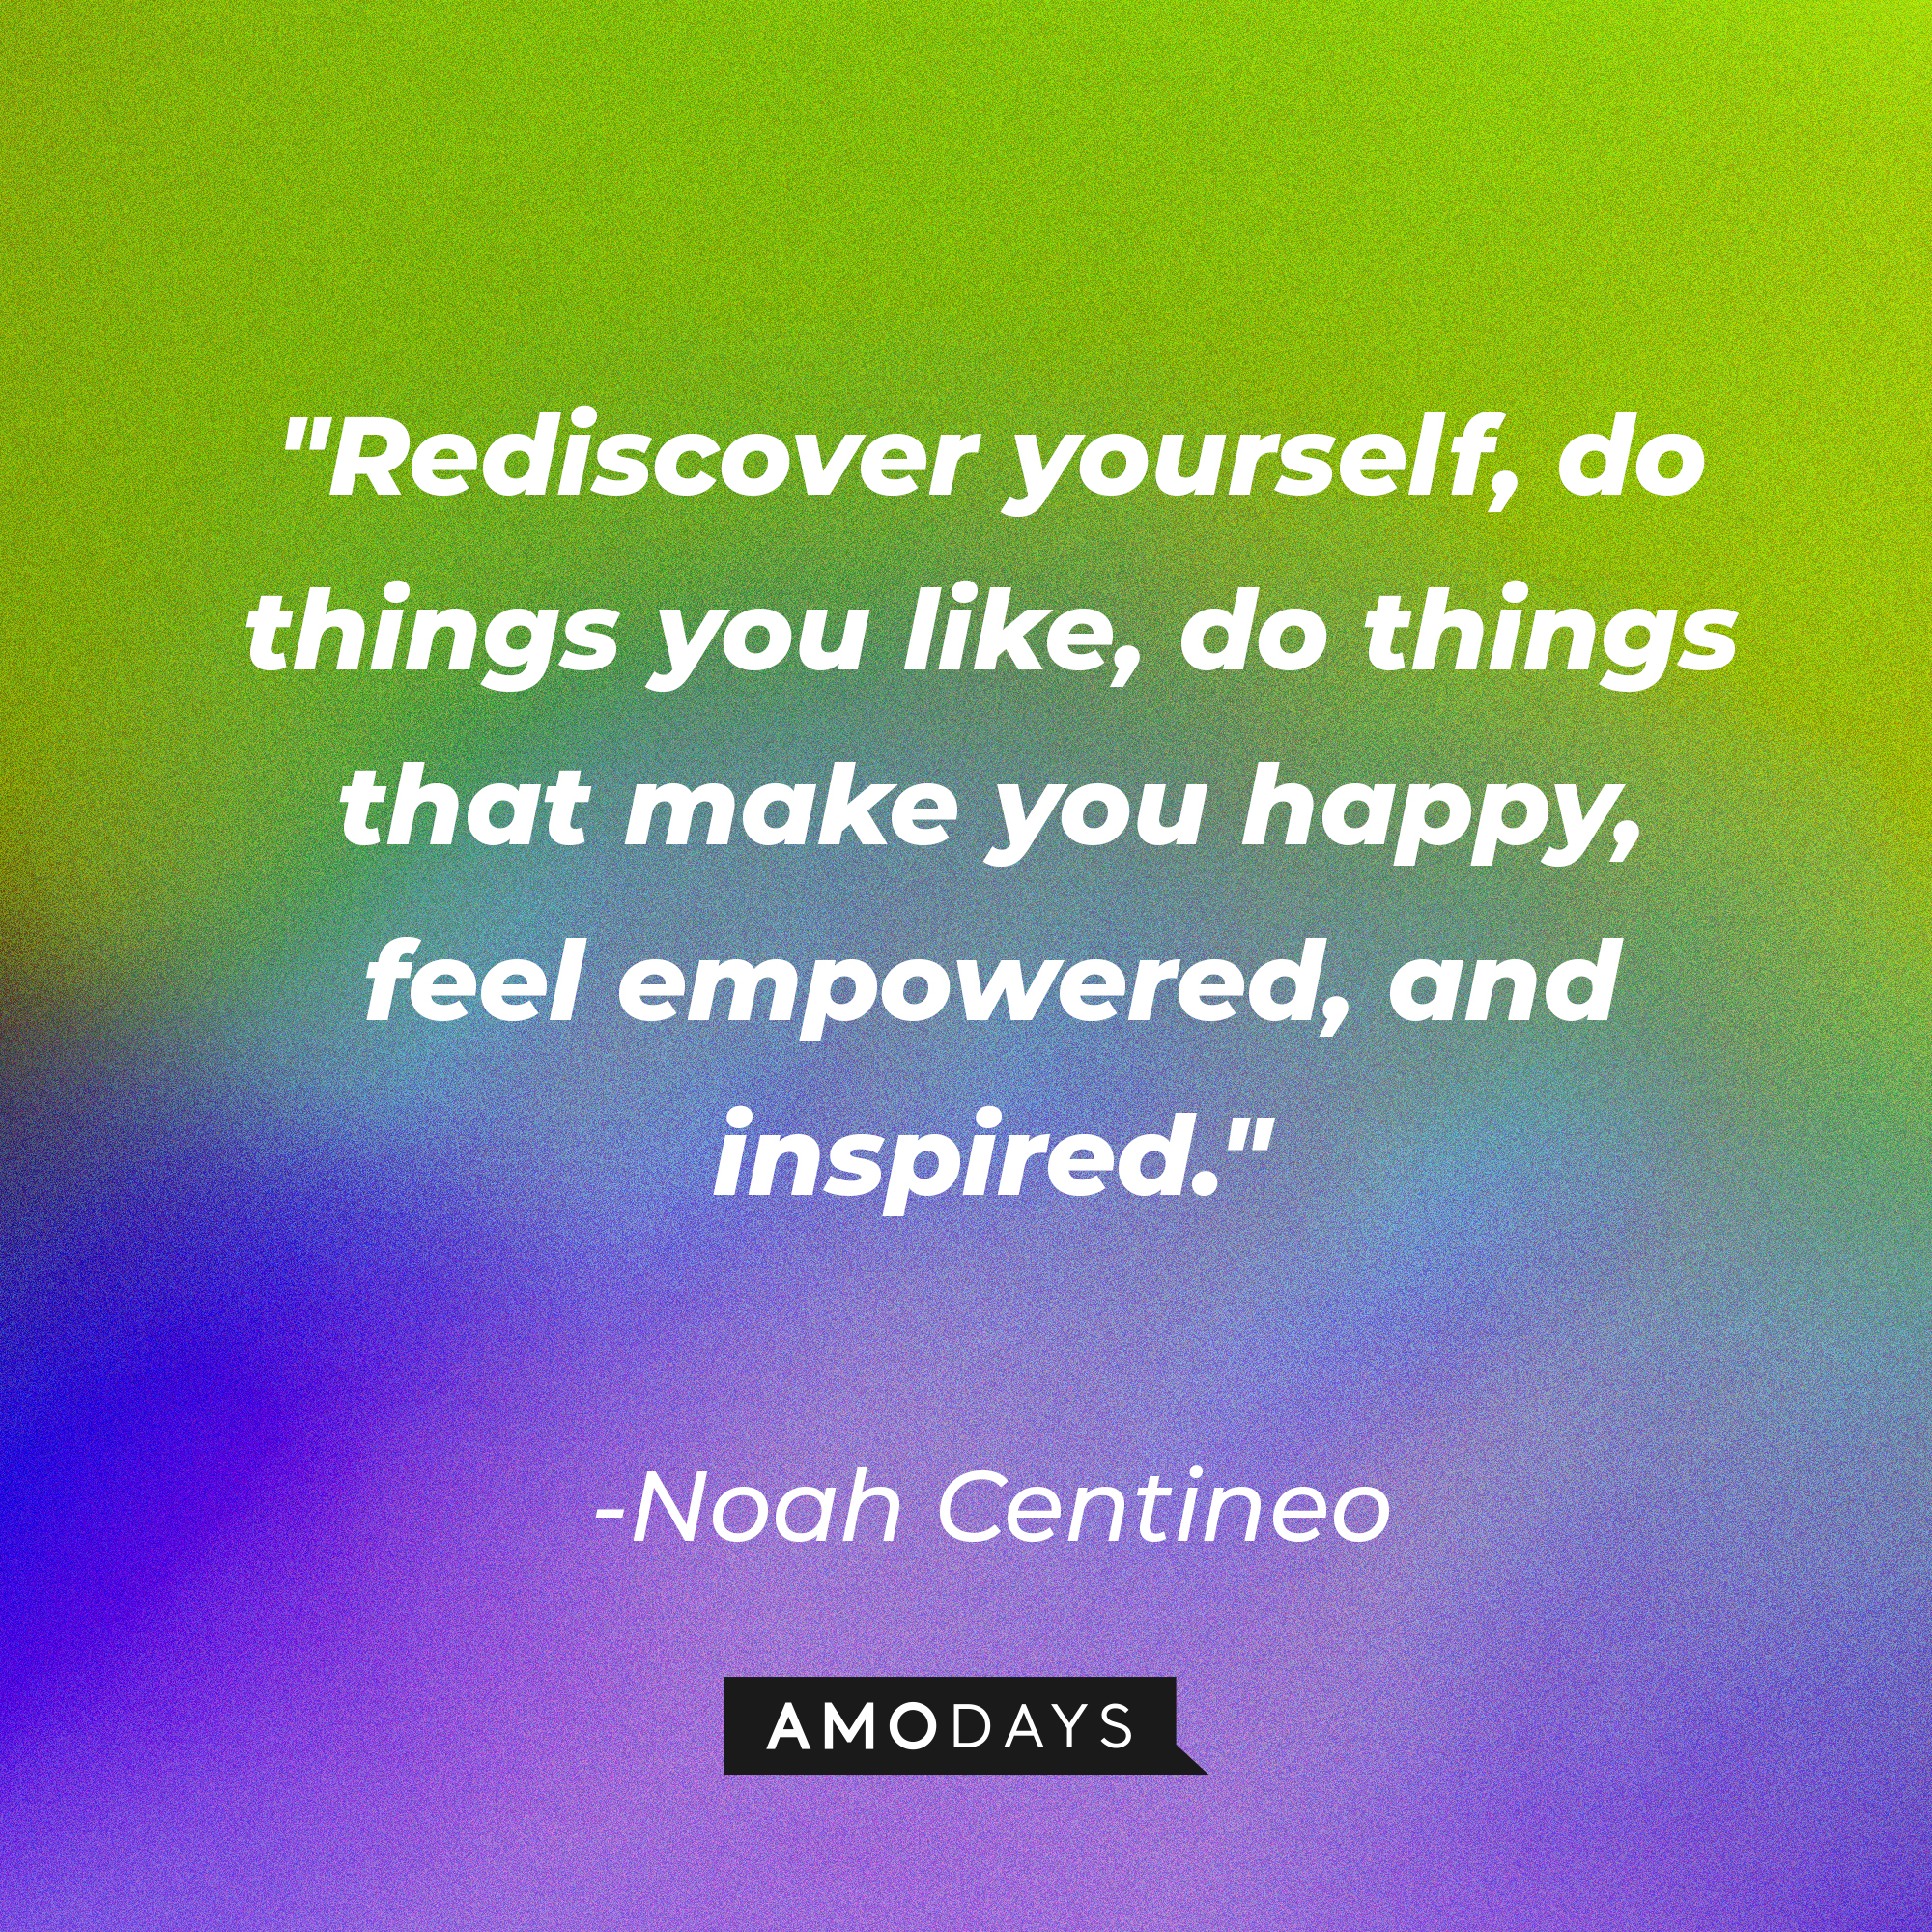 Noah Centineo's quote: "Rediscover yourself, do things you like, do things that make you happy, feel empowered, and inspired." | Image: AmoDays